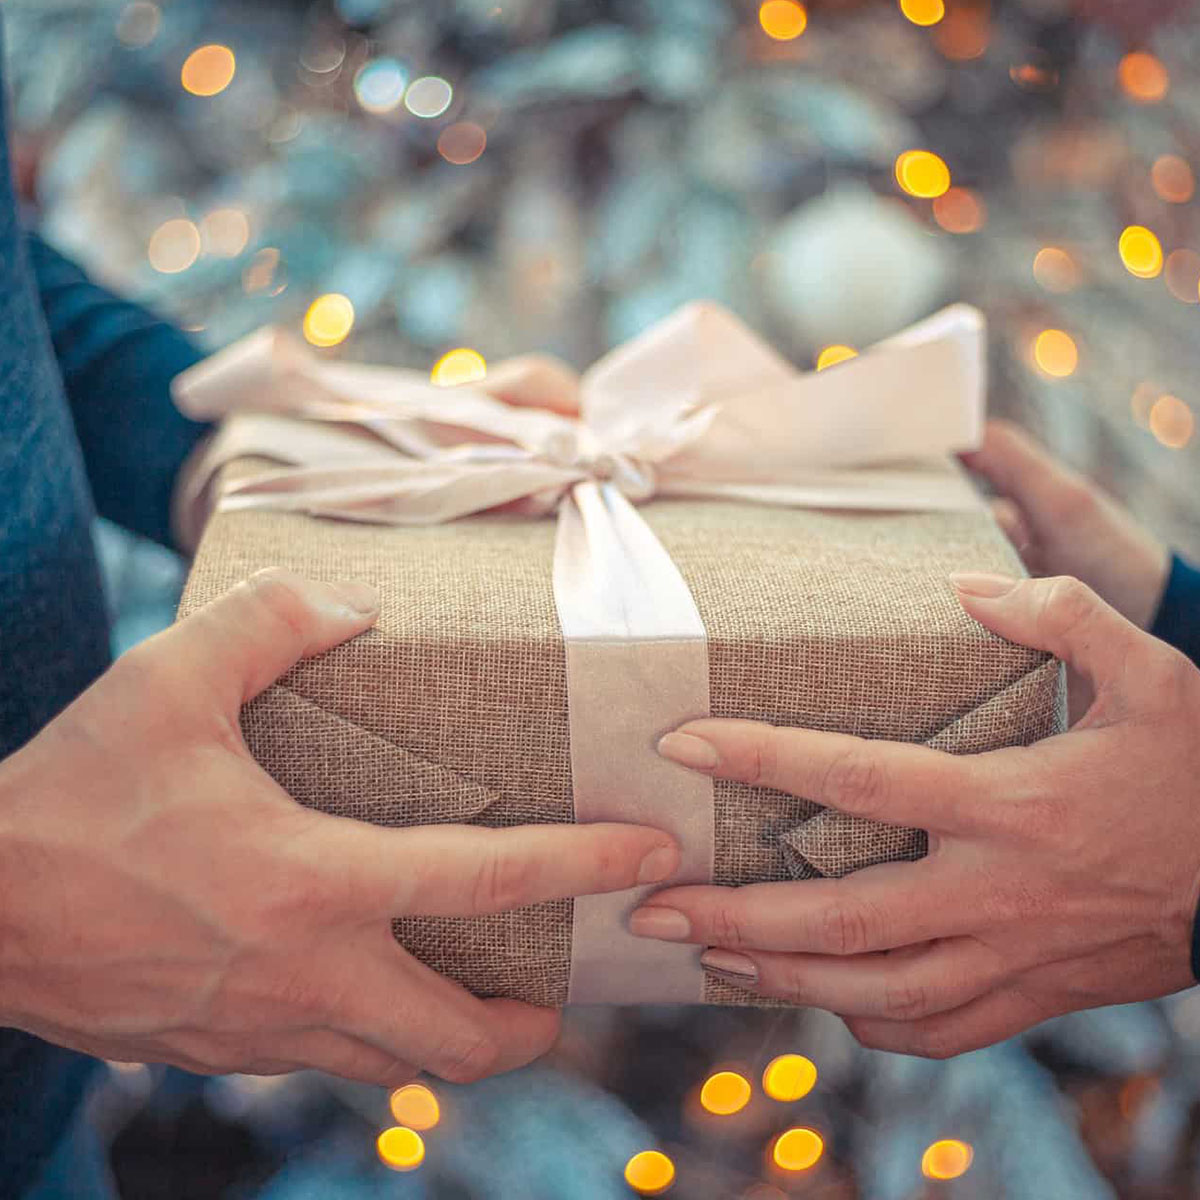 two hands holding a wrapped gift box.